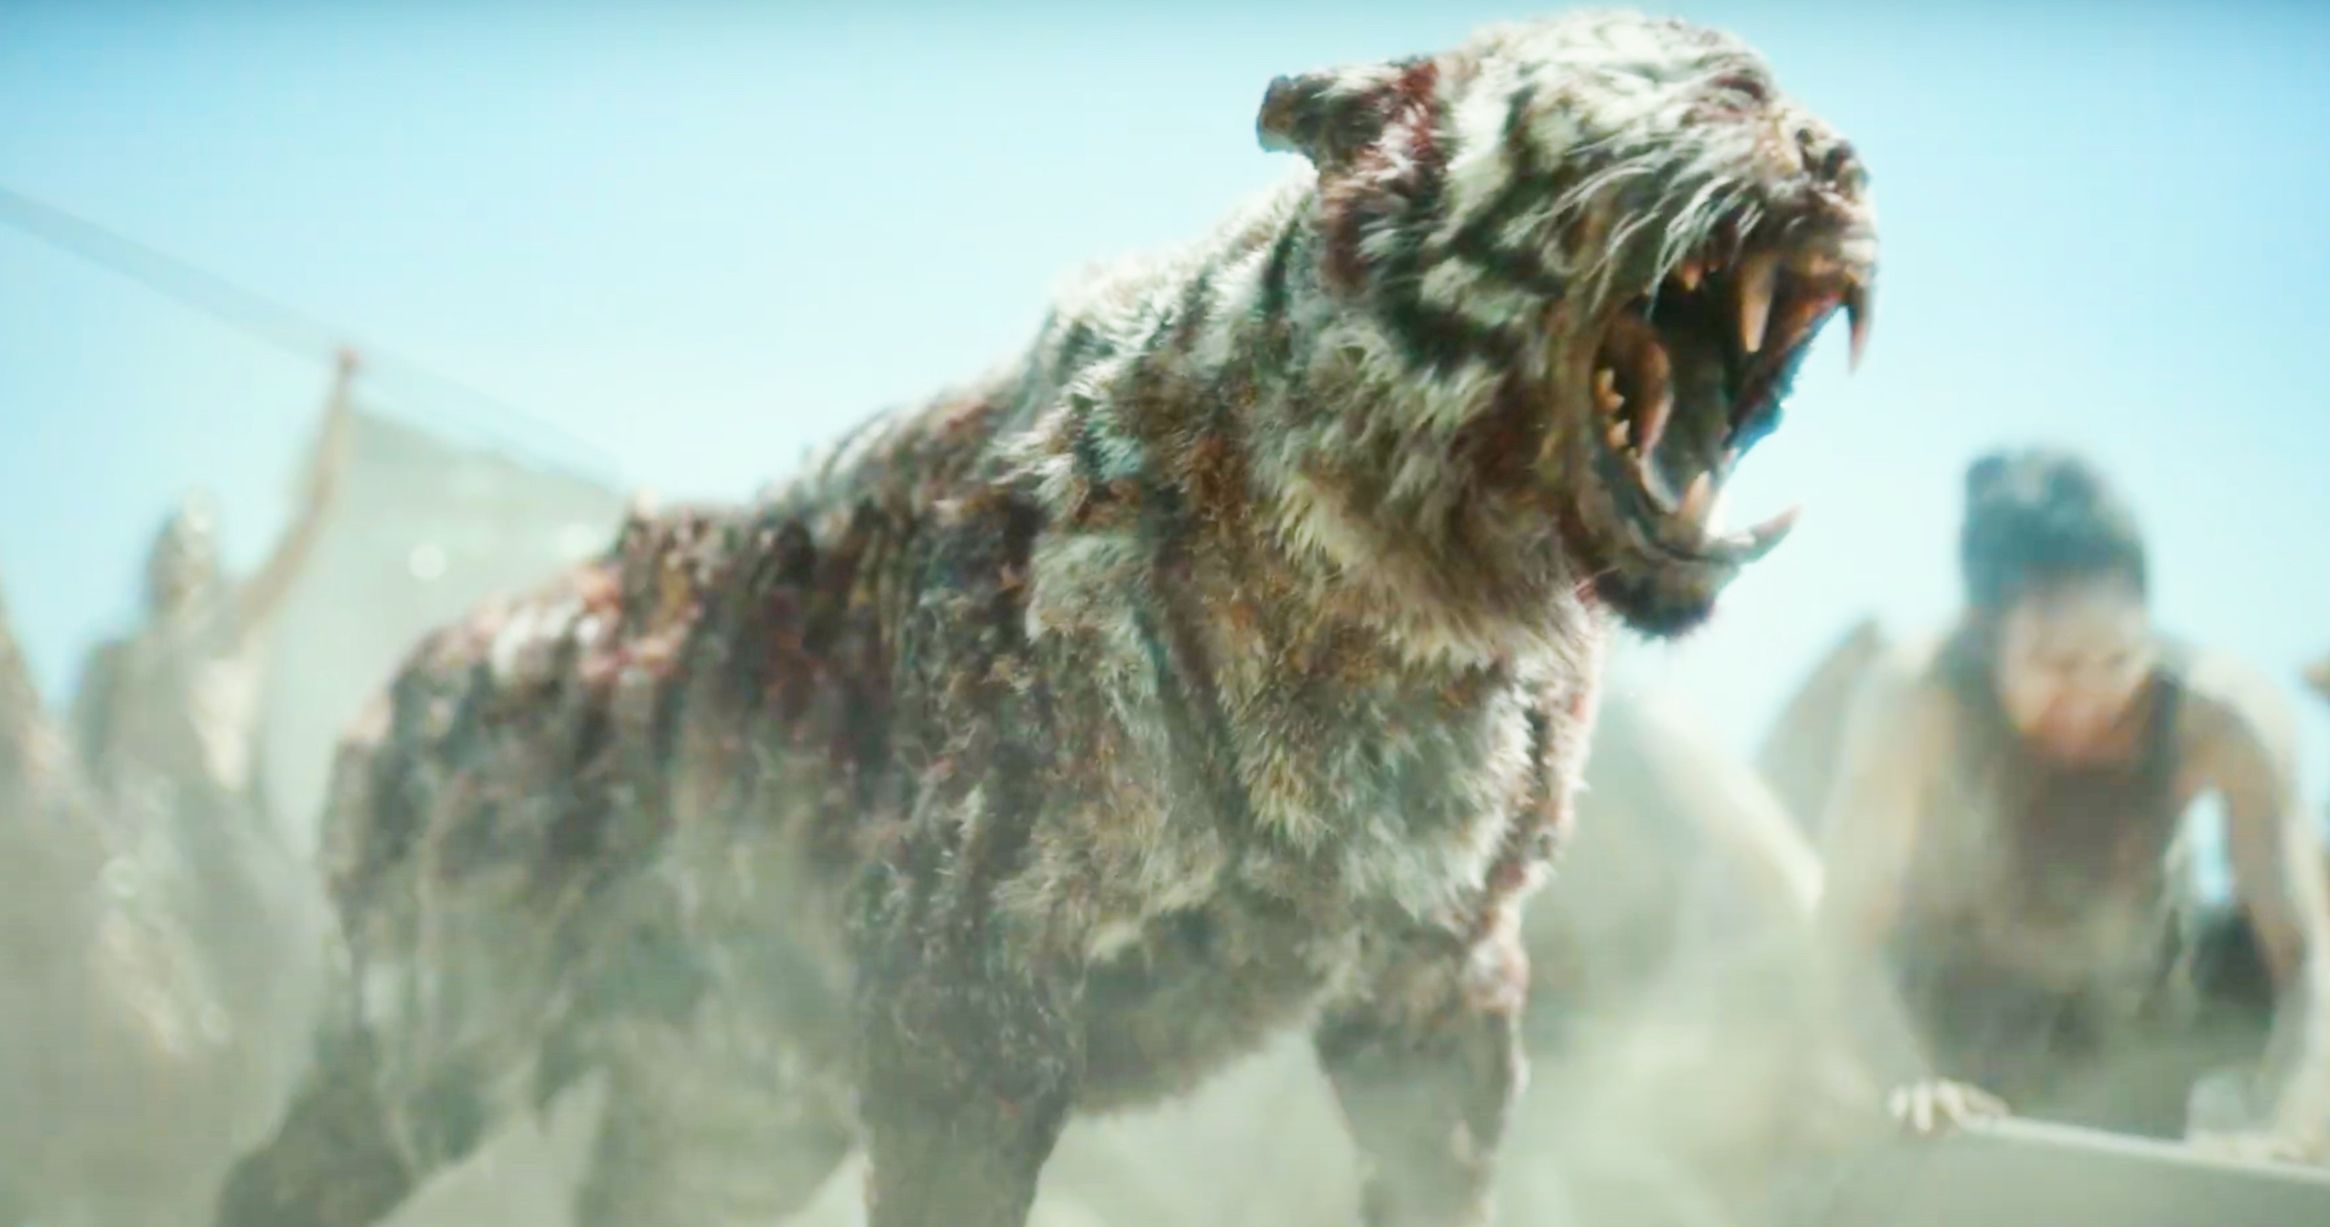 Zack Snyder's Army of the Dead Trailer #2 Unleashes a Zombie Tiger in Las Vegas